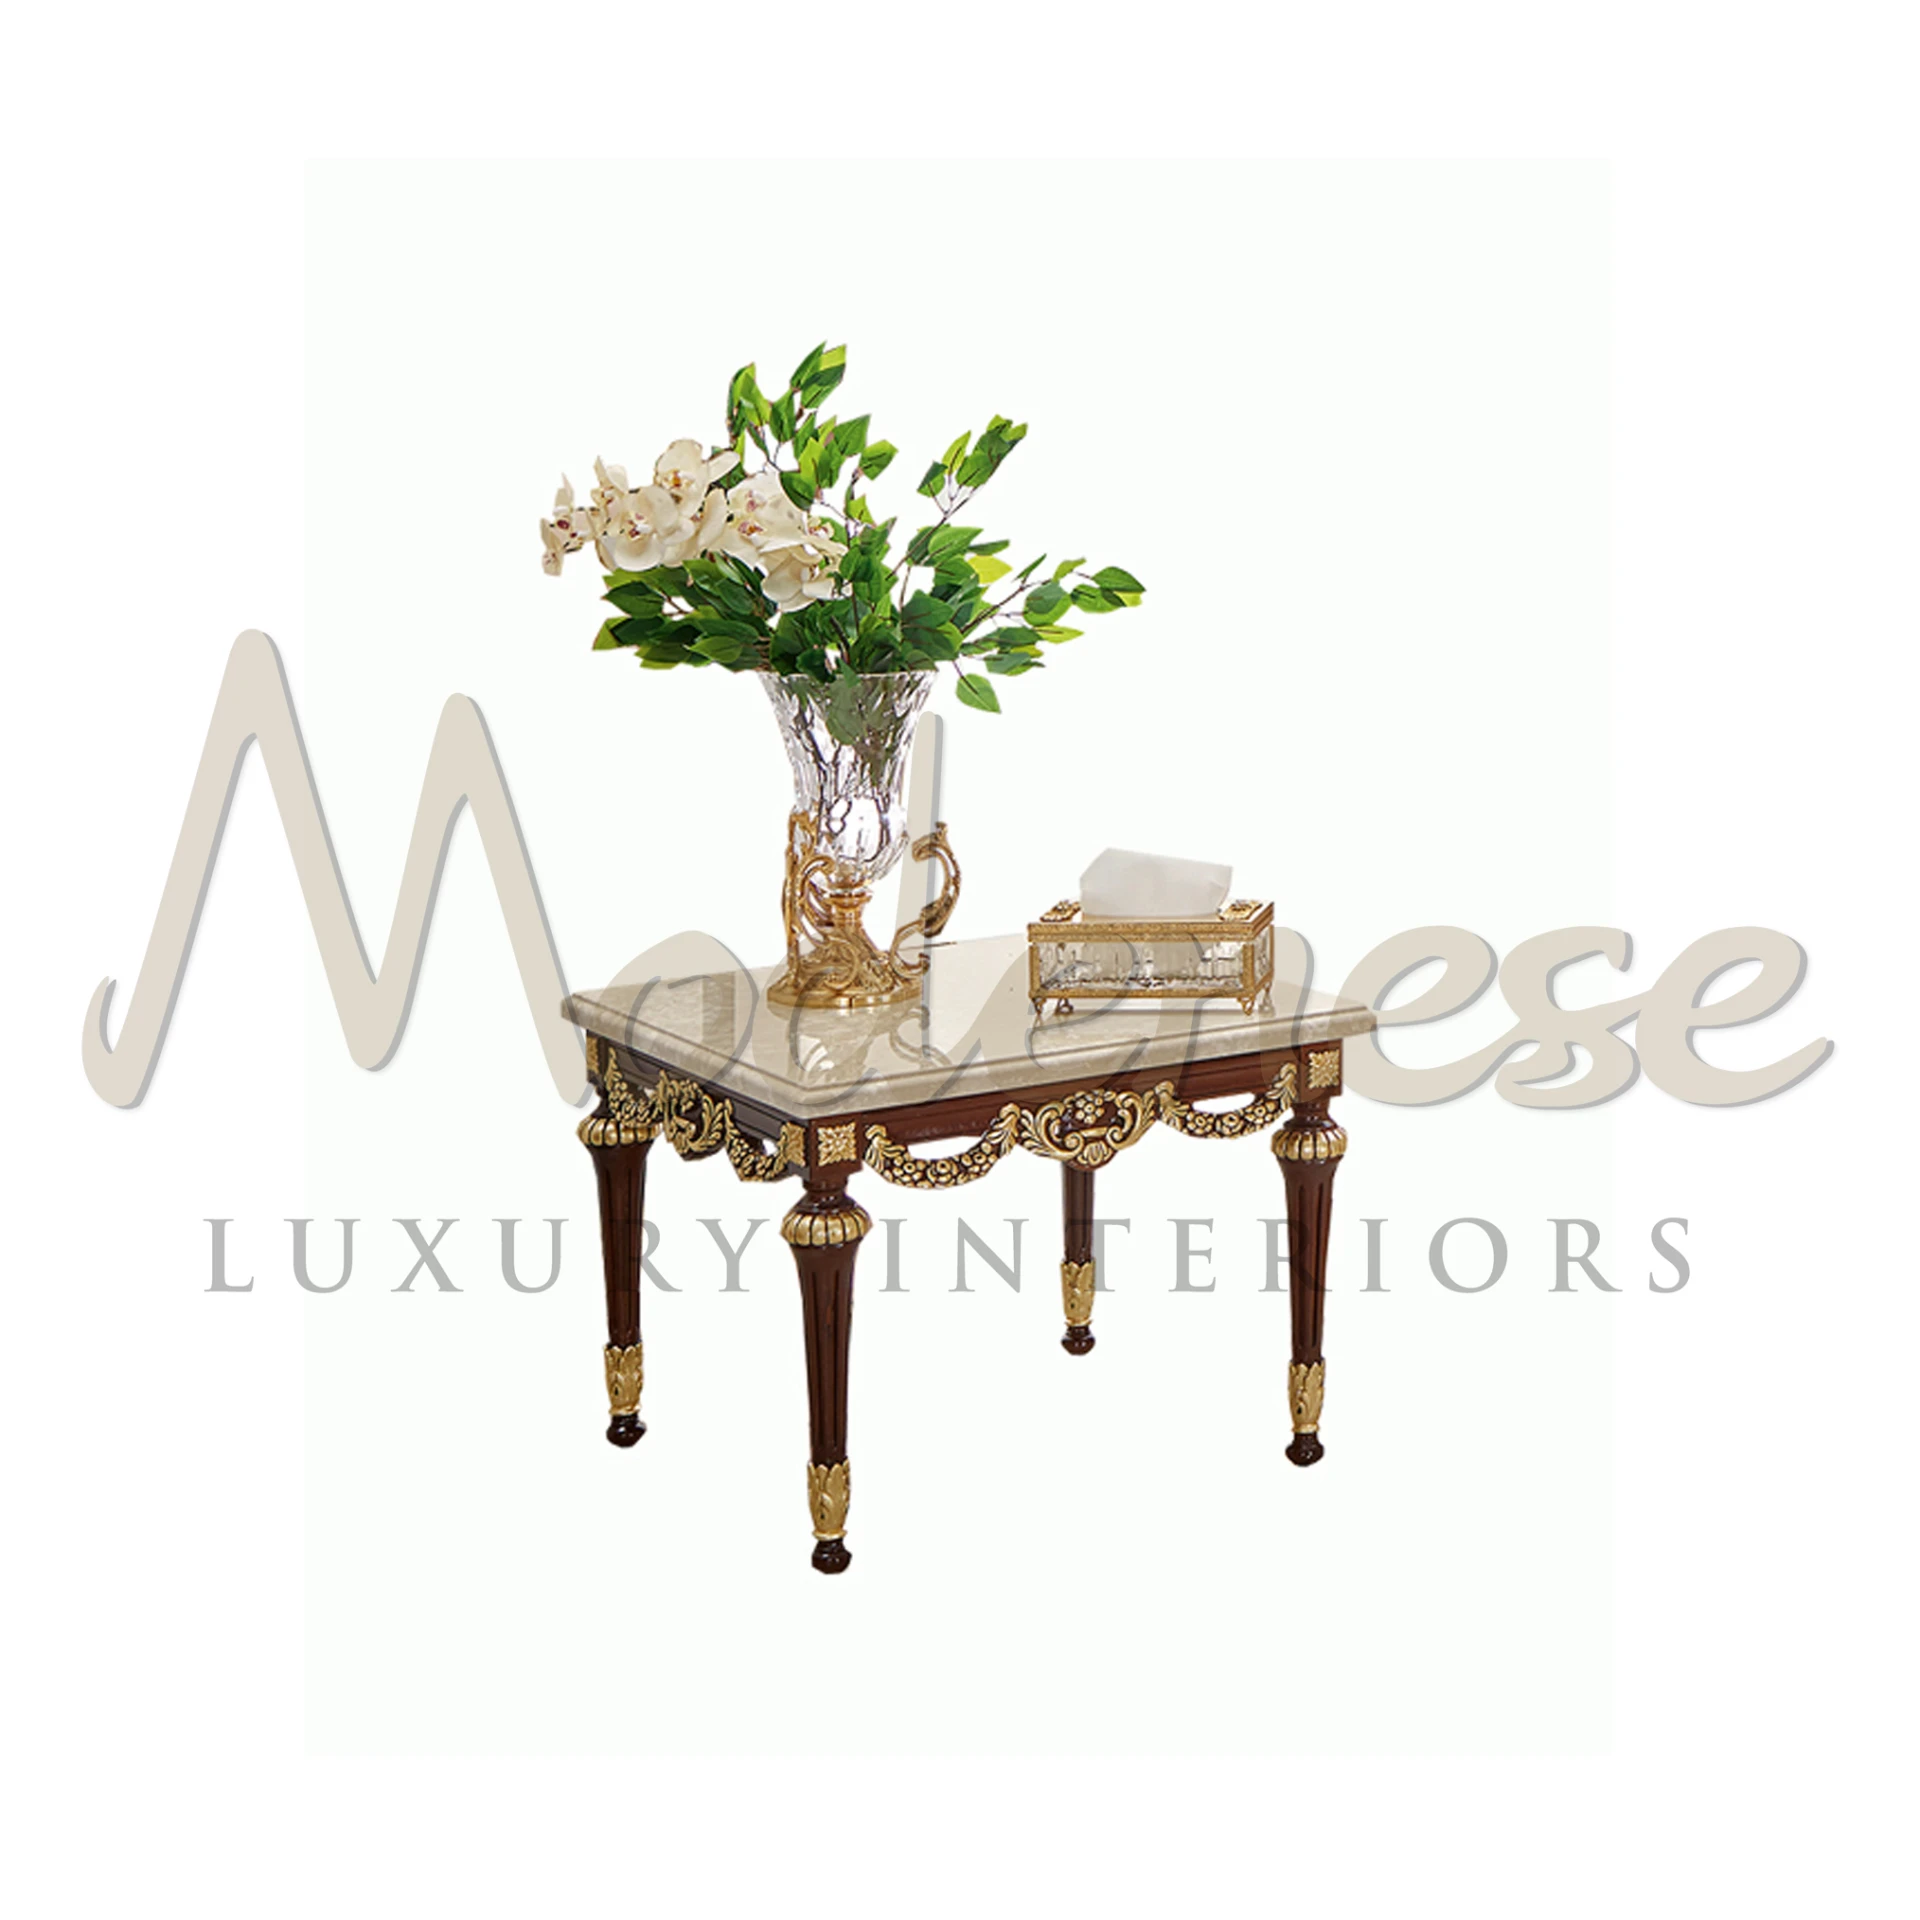 Charming Classic Walnut Finish Side Table with gold leaf carving, embodying luxury Italian design for elegant interiors.